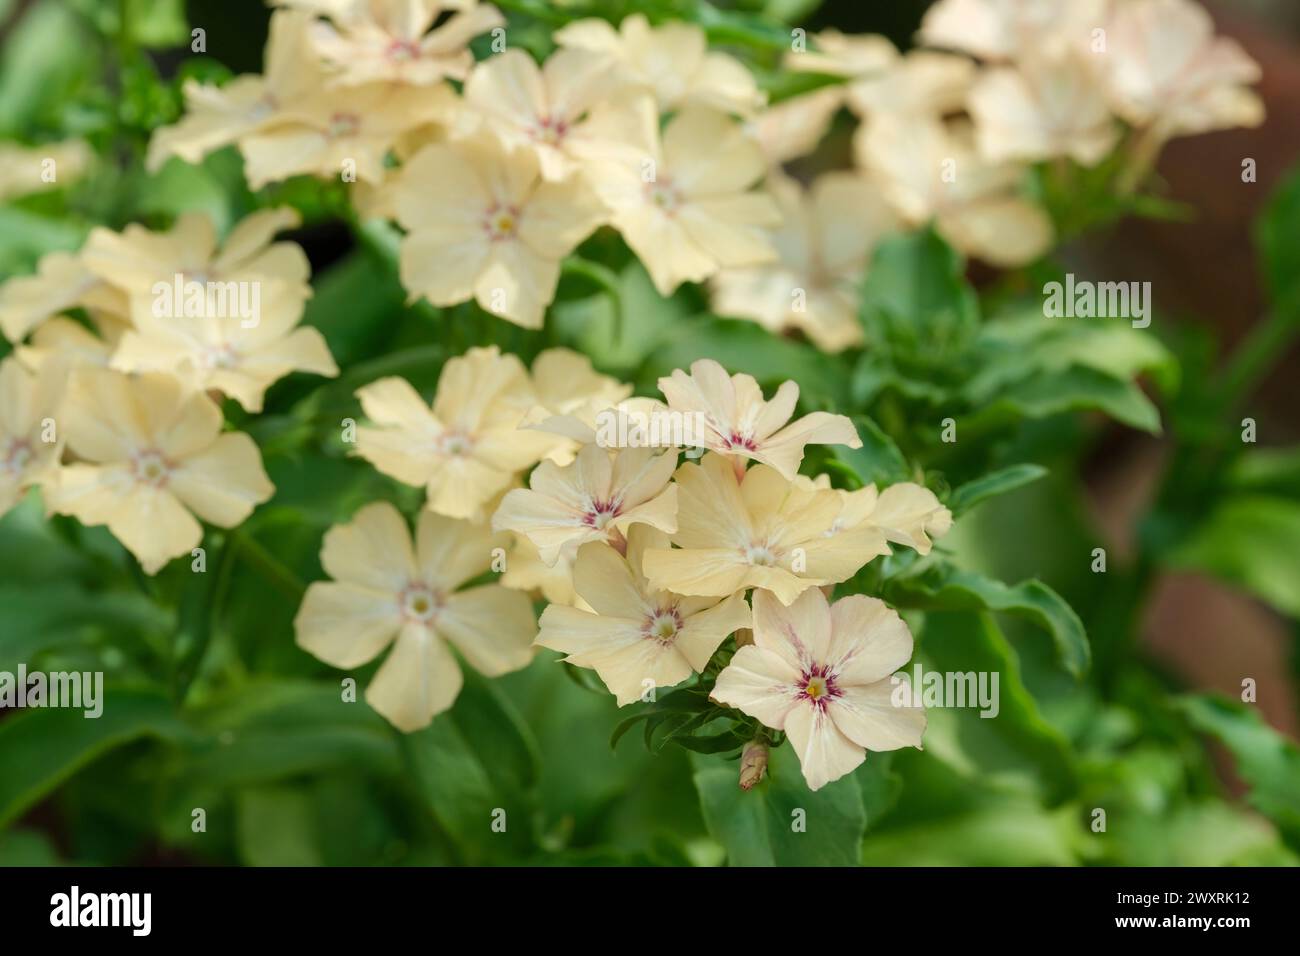 Phlox drummondii grandiflora Creme Brulee, coffee mousse with a wash of cassis flowers Stock Photo